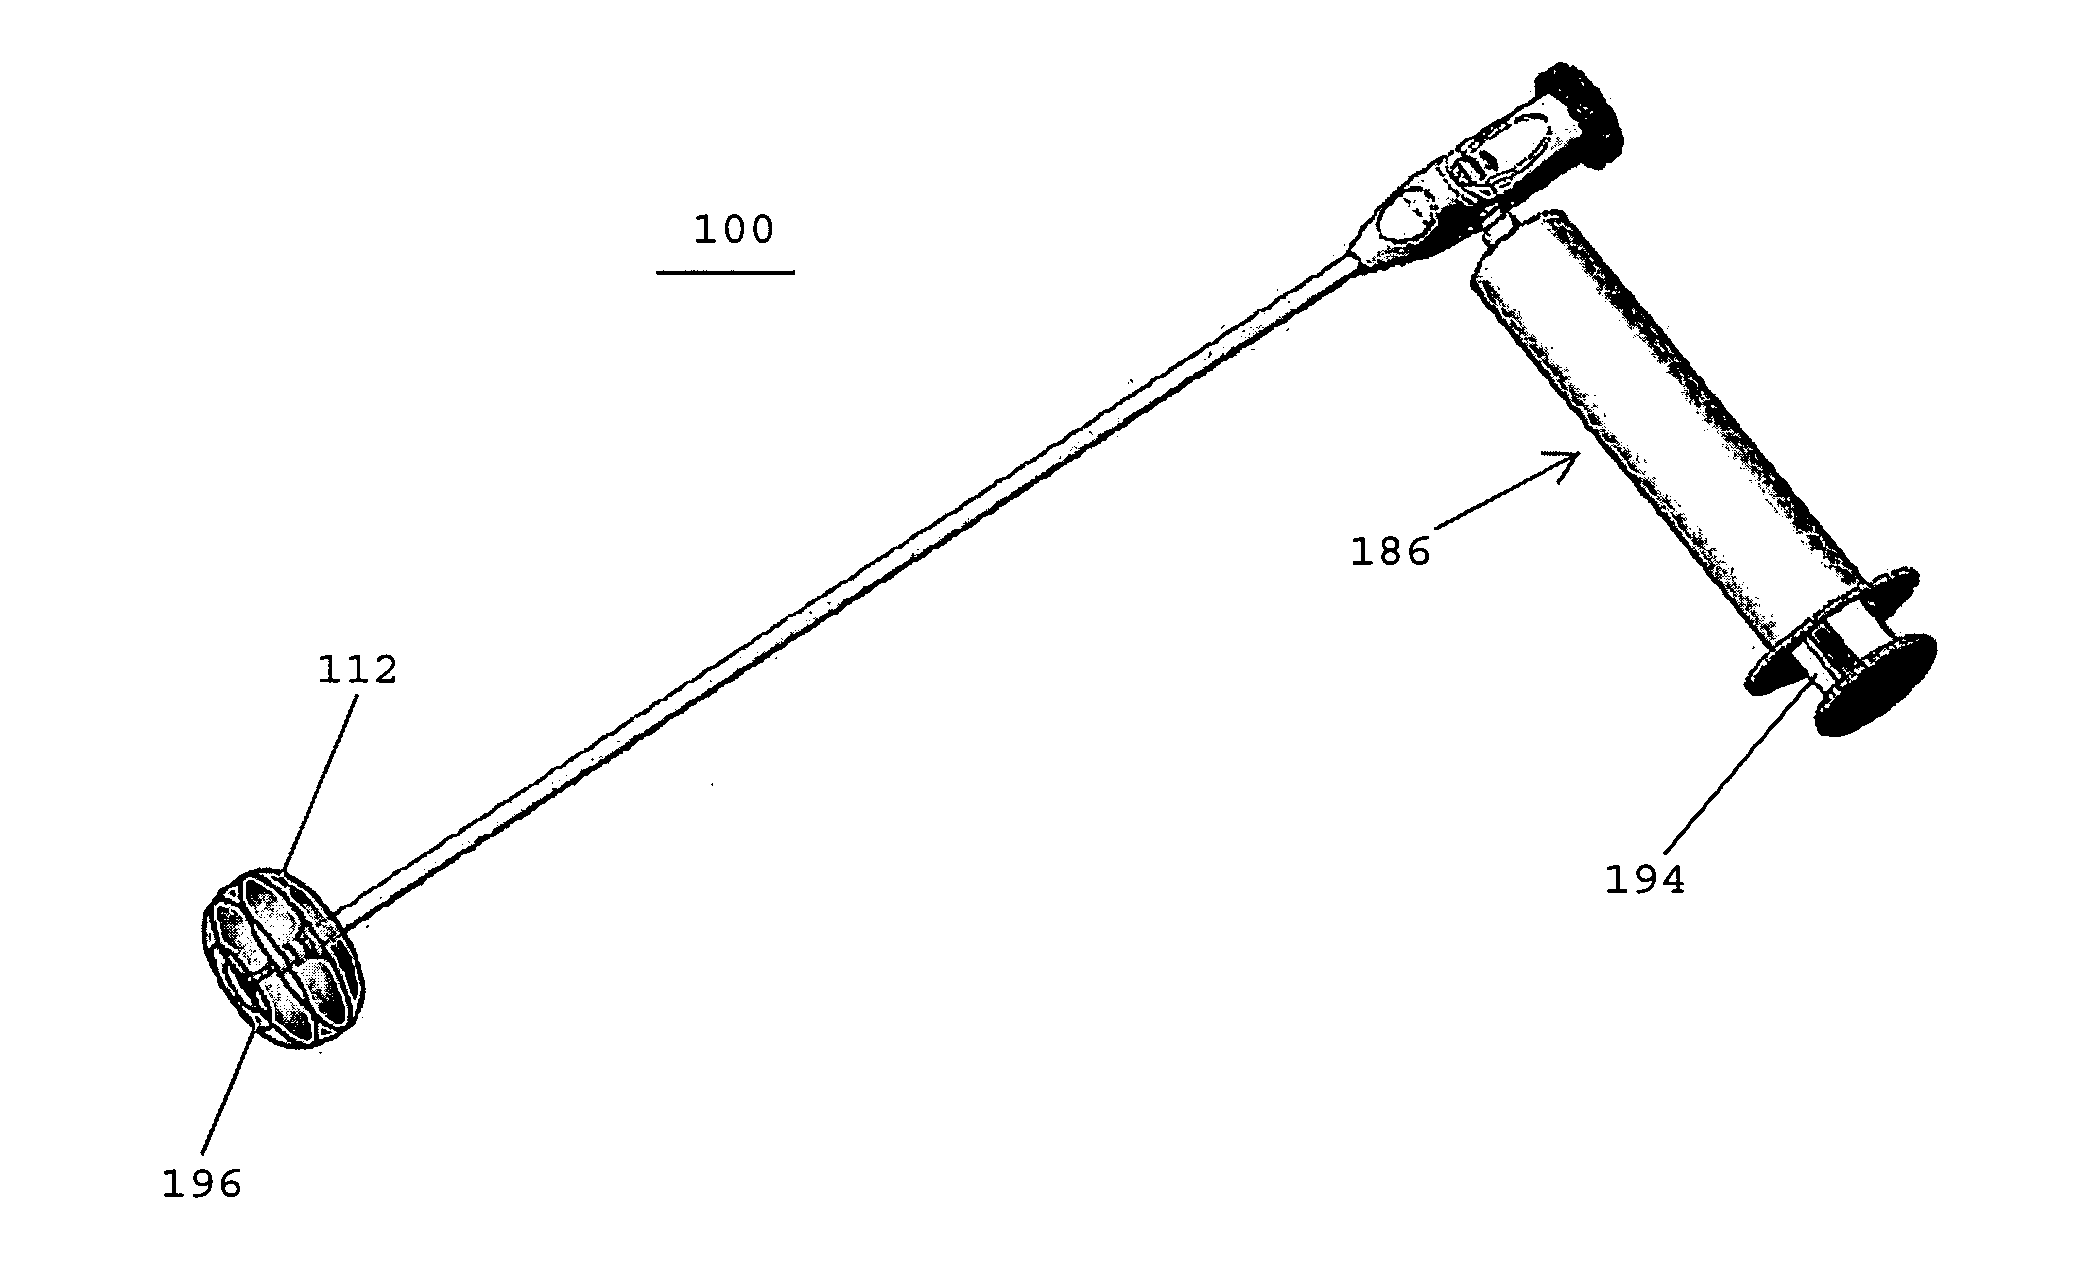 Applicator instruments for controlling bleeding at surgical sites and methods therefor